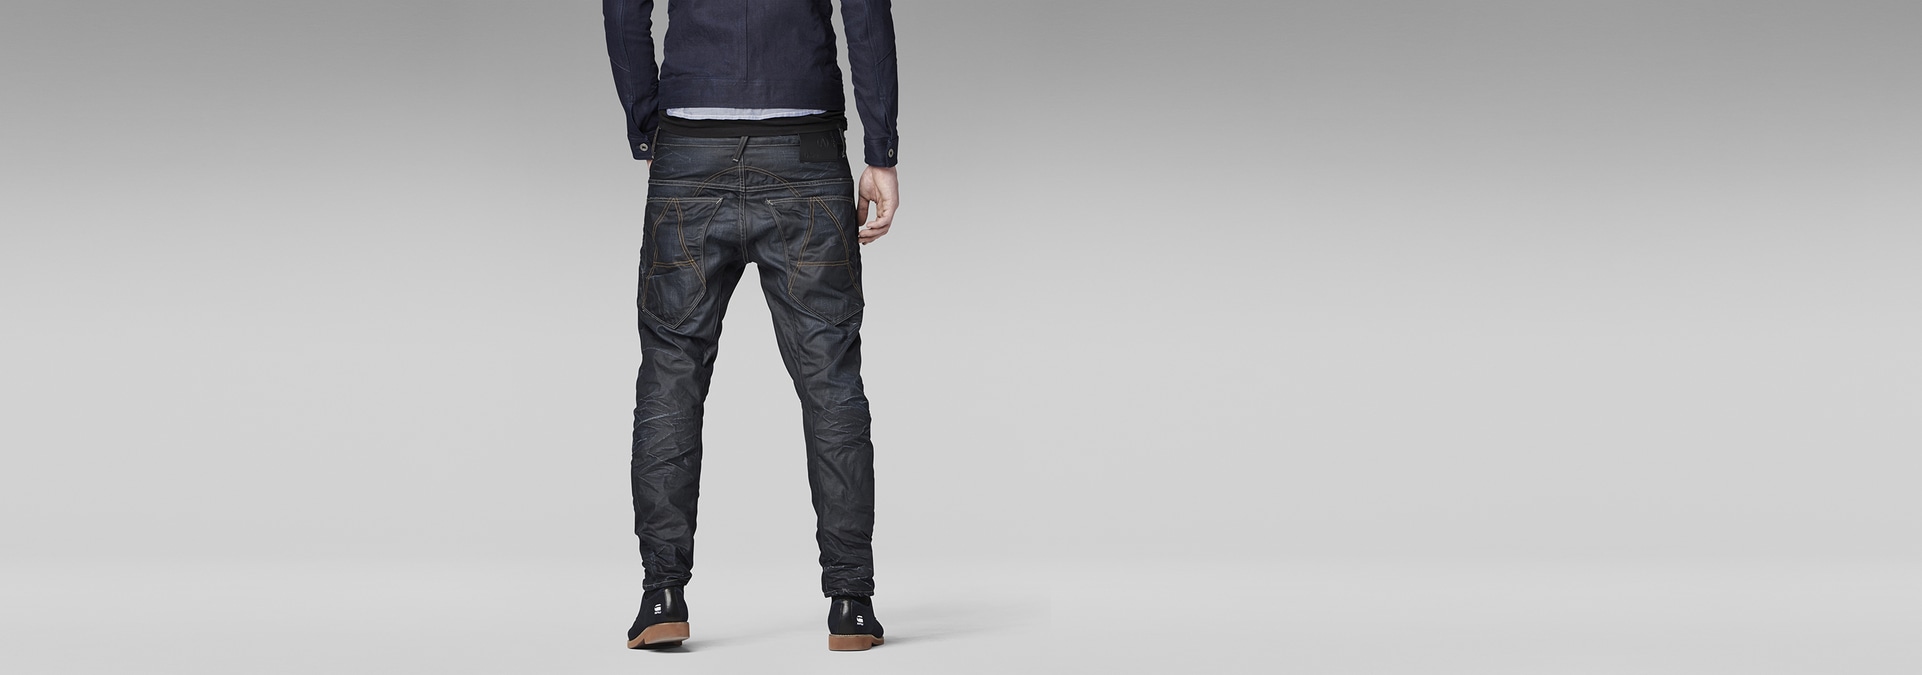 G-Star RAW | Men | Jeans | A-crotch Tapered Jeans , Dark Aged